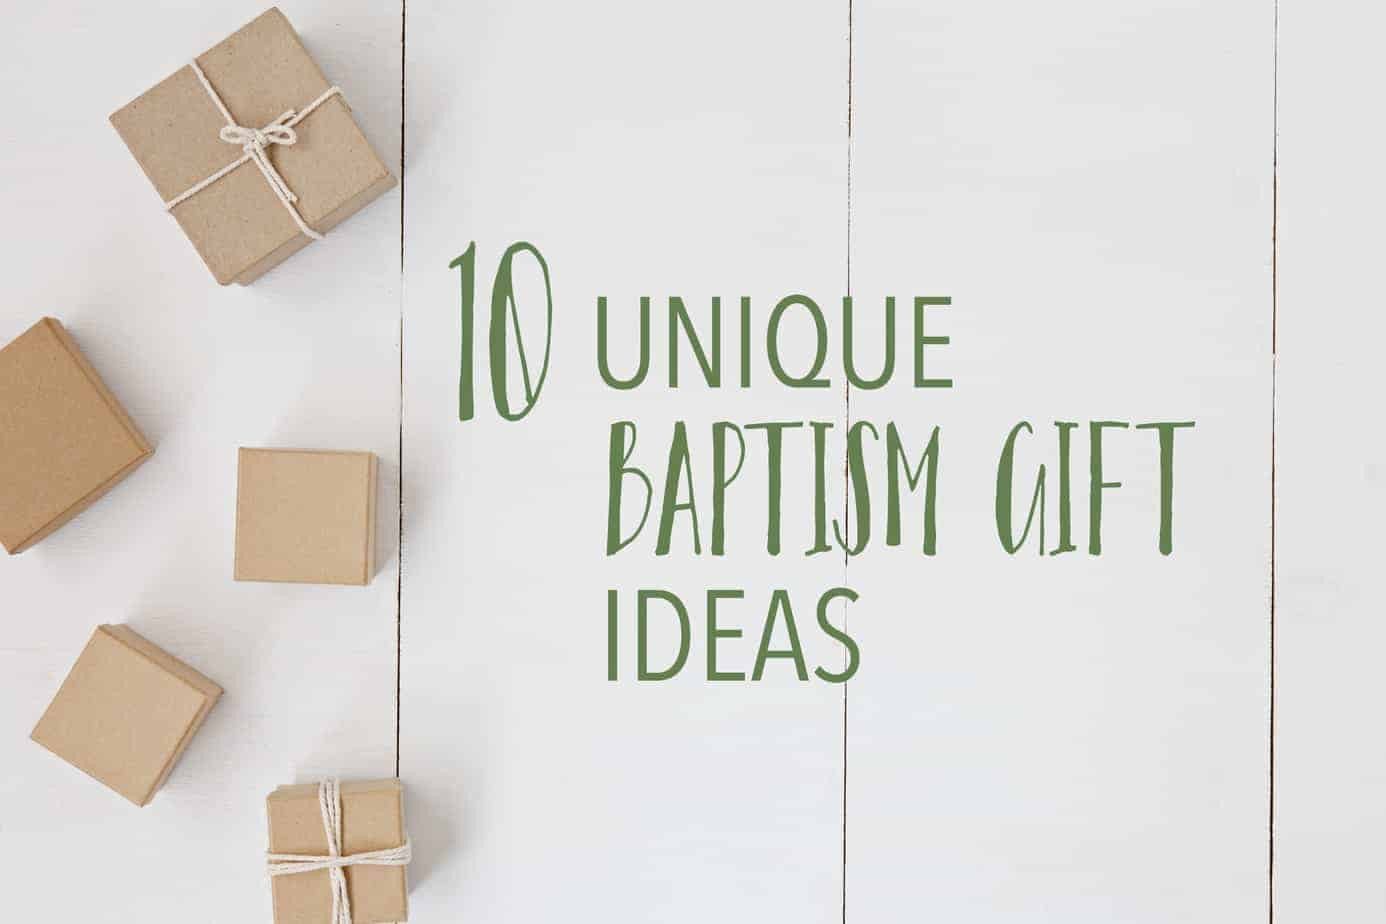 Gift Ideas For A Baby'S Baptism
 10 Unique Baptism Gifts that are Useful & Special